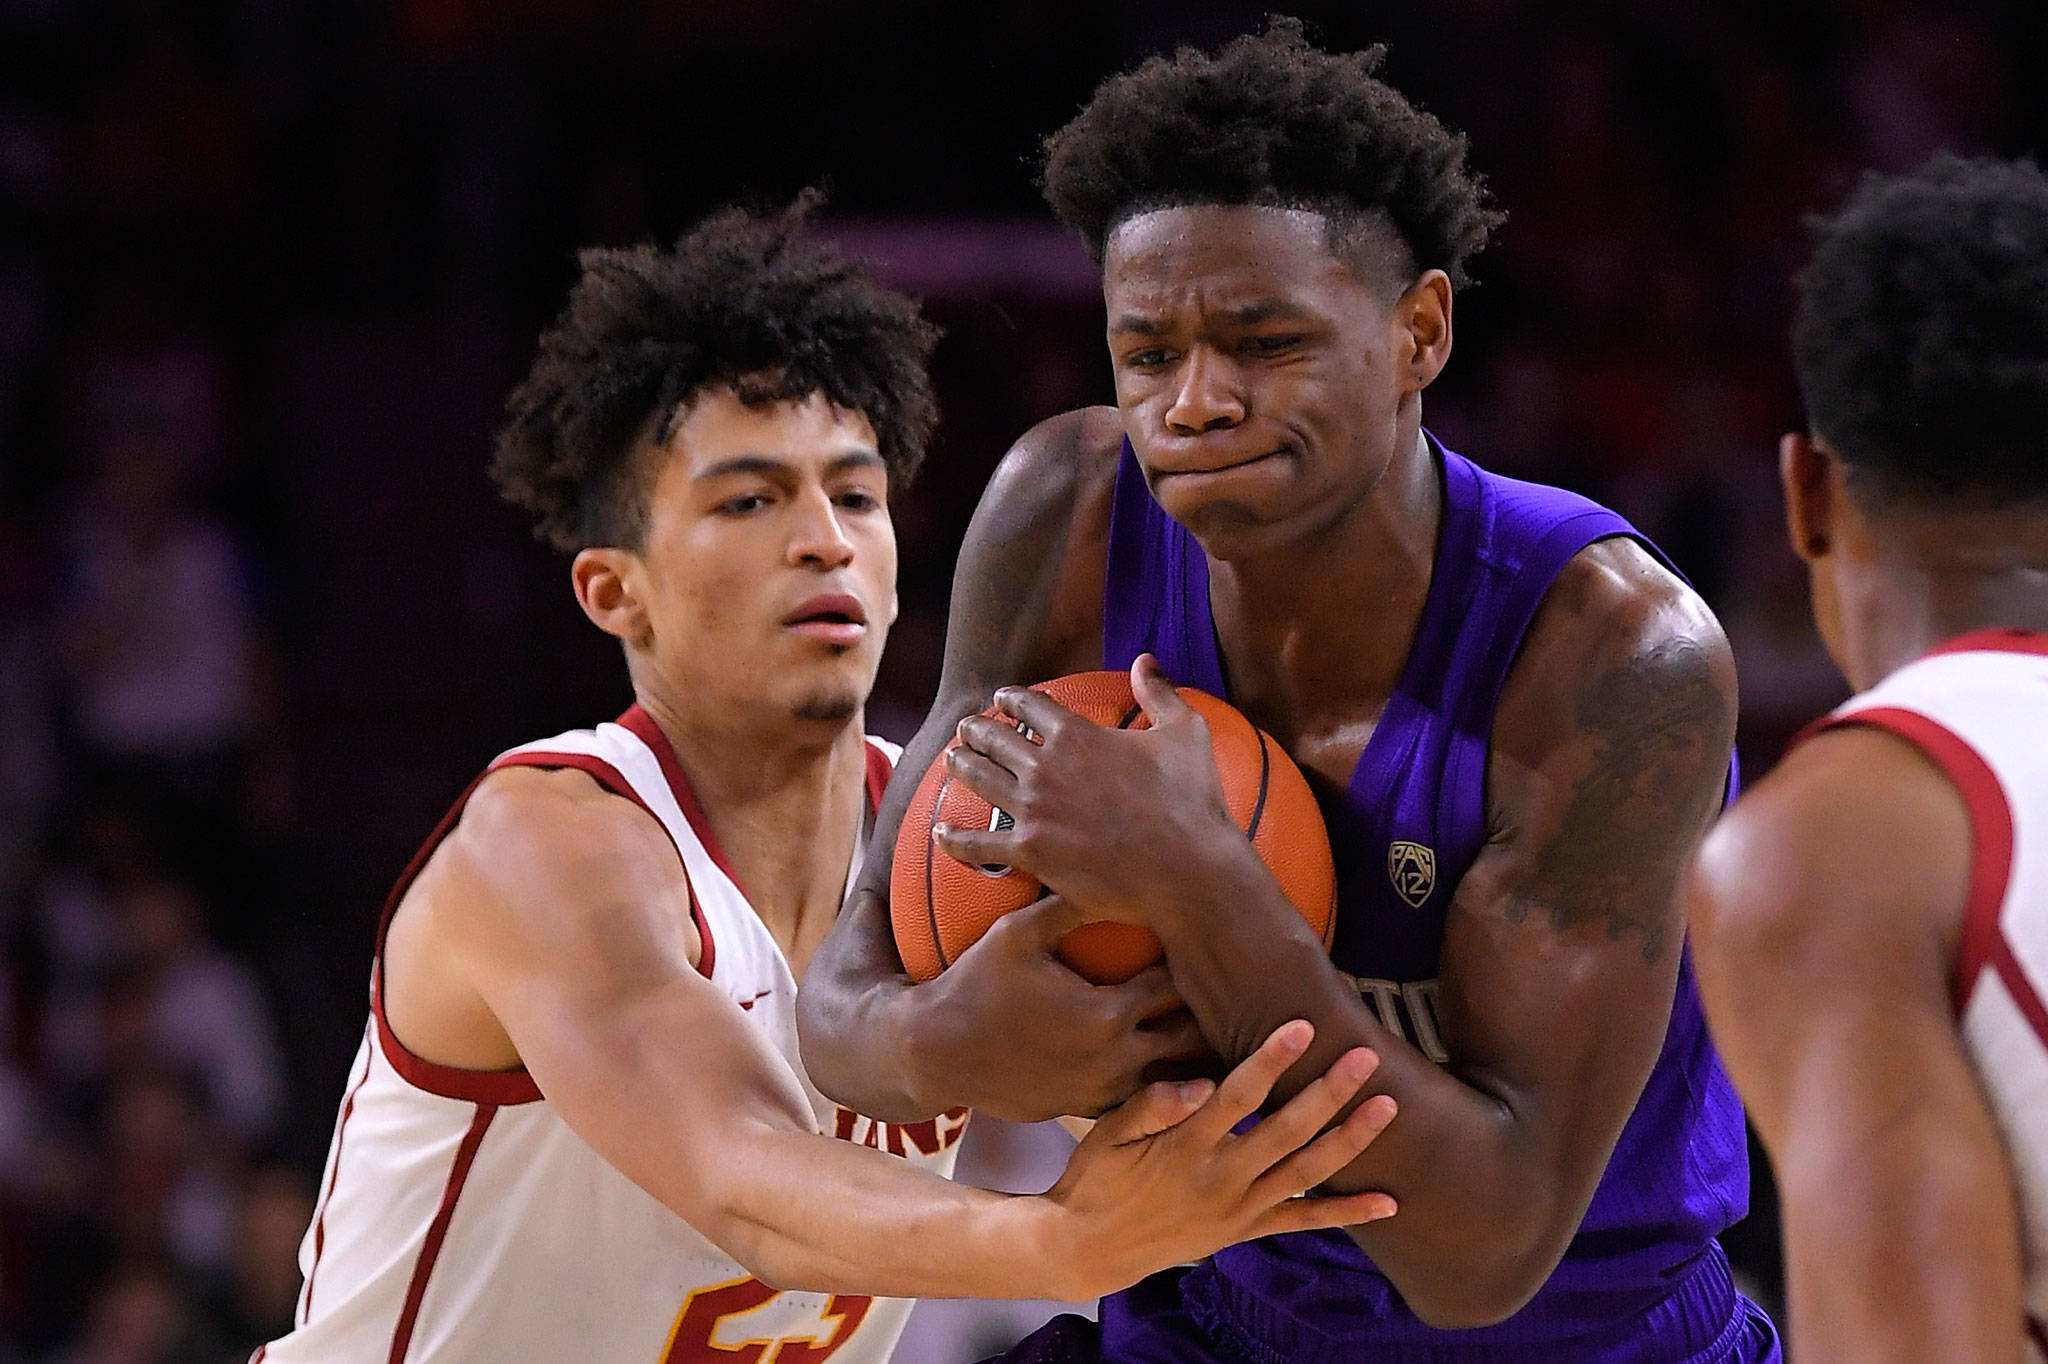 USC forward Max Agbonkpolo (left) ties up Washington guard Nahziah Carter during the first half of a game Thursday in Los Angeles. (AP Photo/Mark J. Terrill)